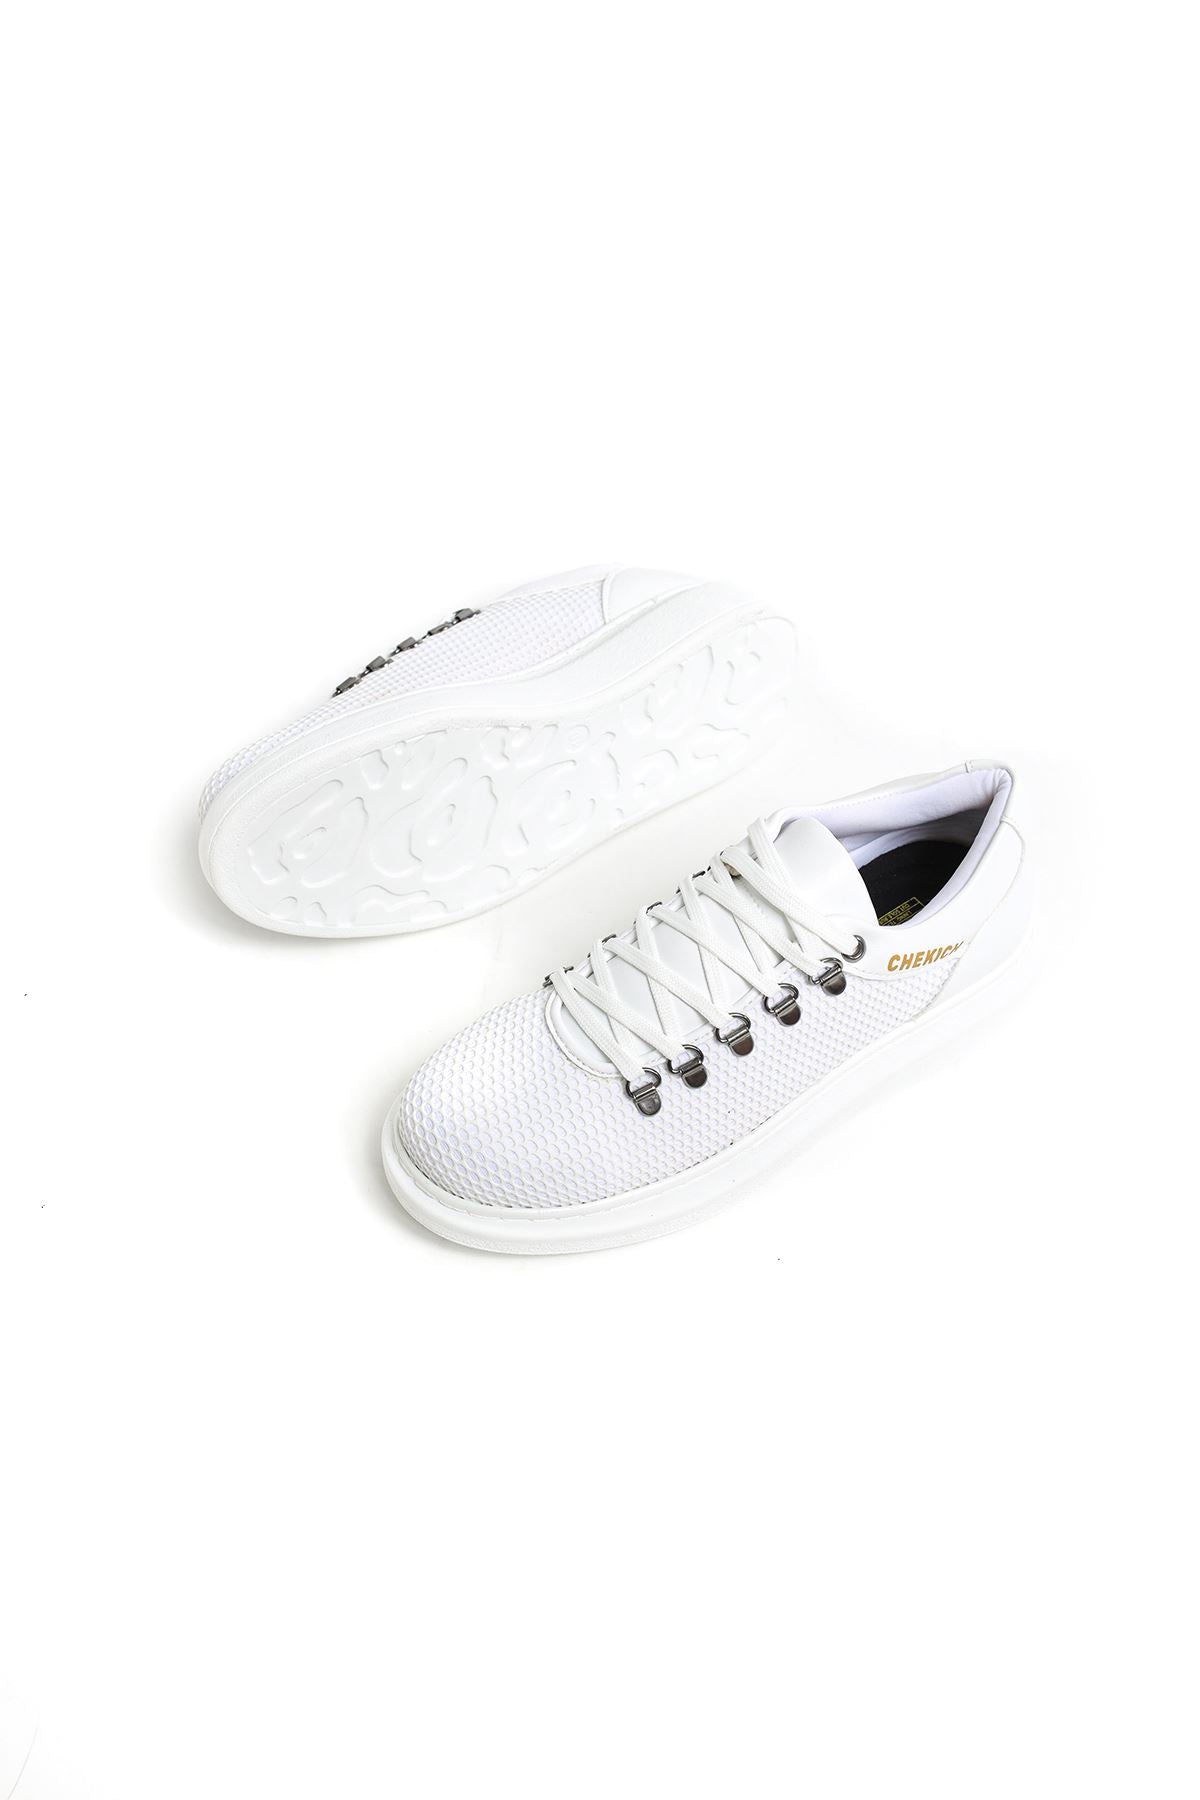 CH021 Men's Unisex Full White Honeycomb Processing Casual Sneaker Sports Shoes - STREETMODE ™